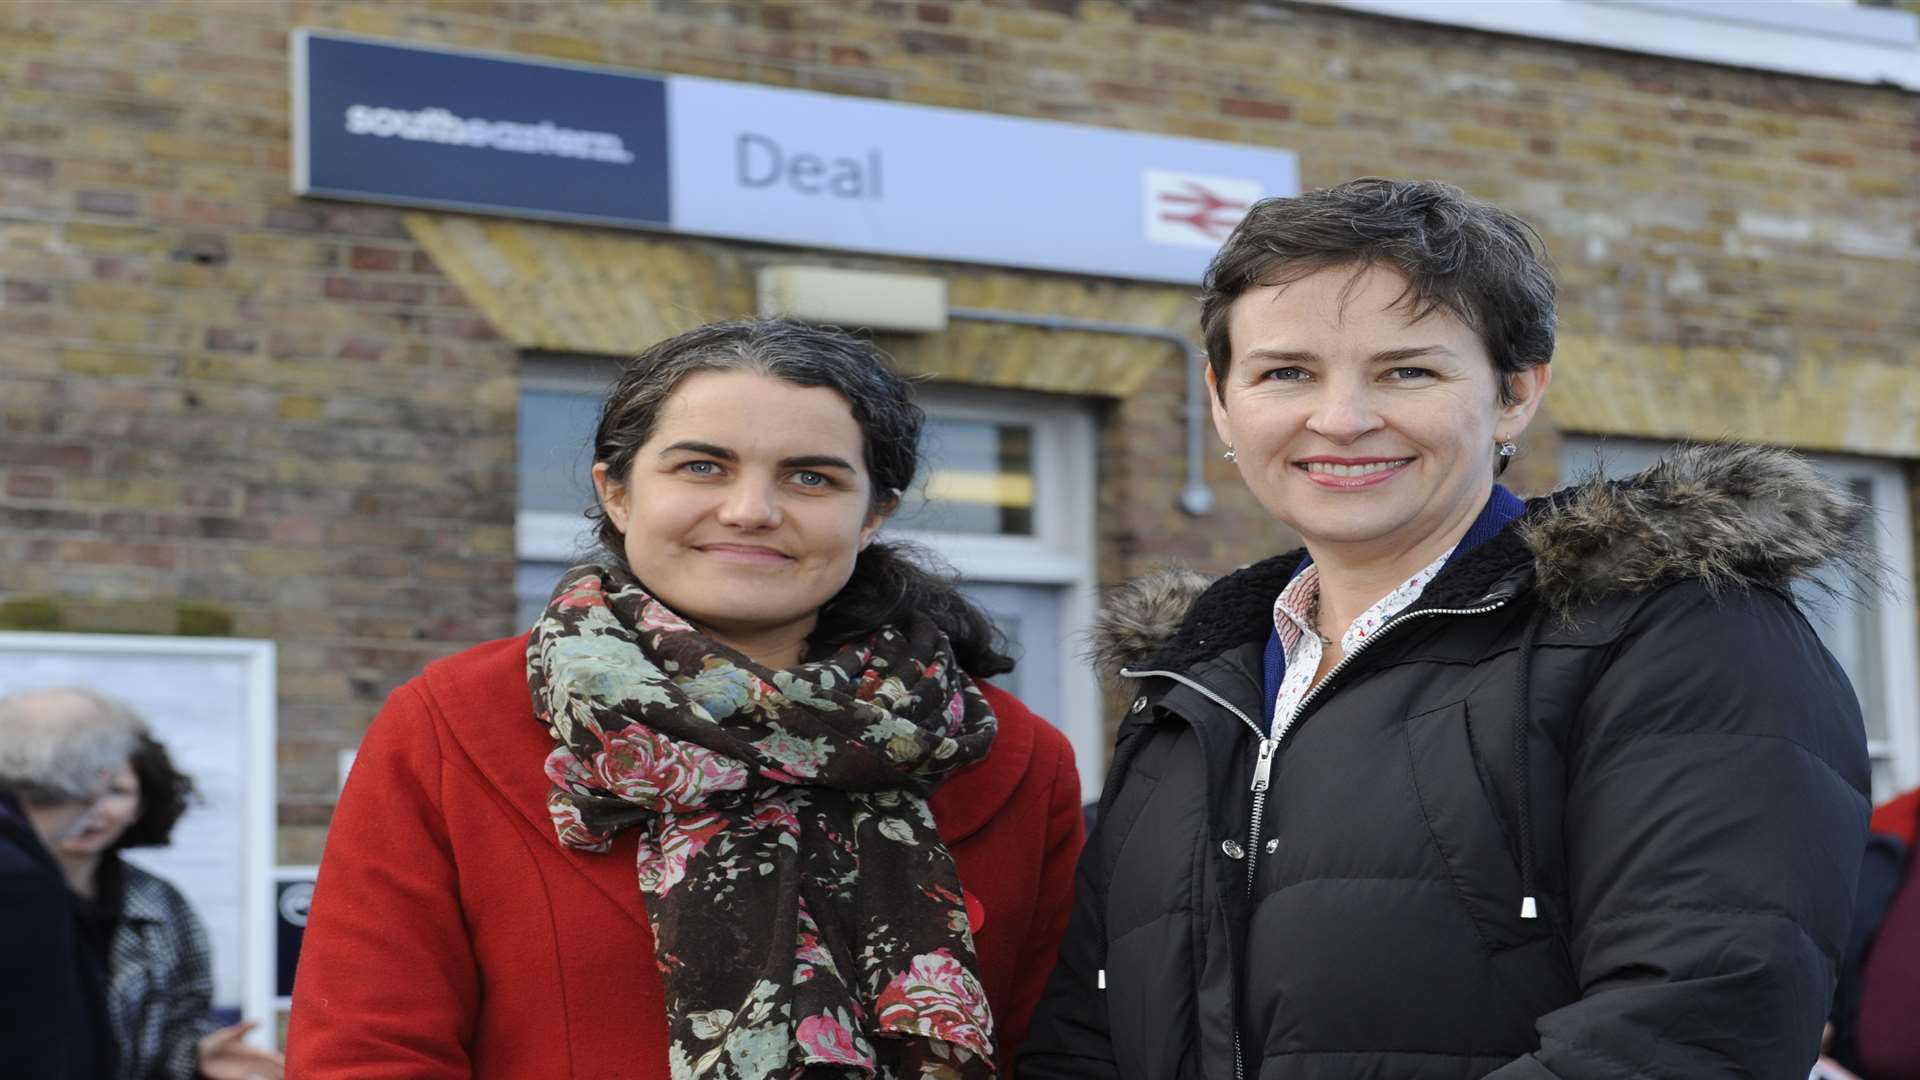 Labour's Clair Hawkins and secretary of state for transport Mary Creagh talking to commuters at Deal train station last year